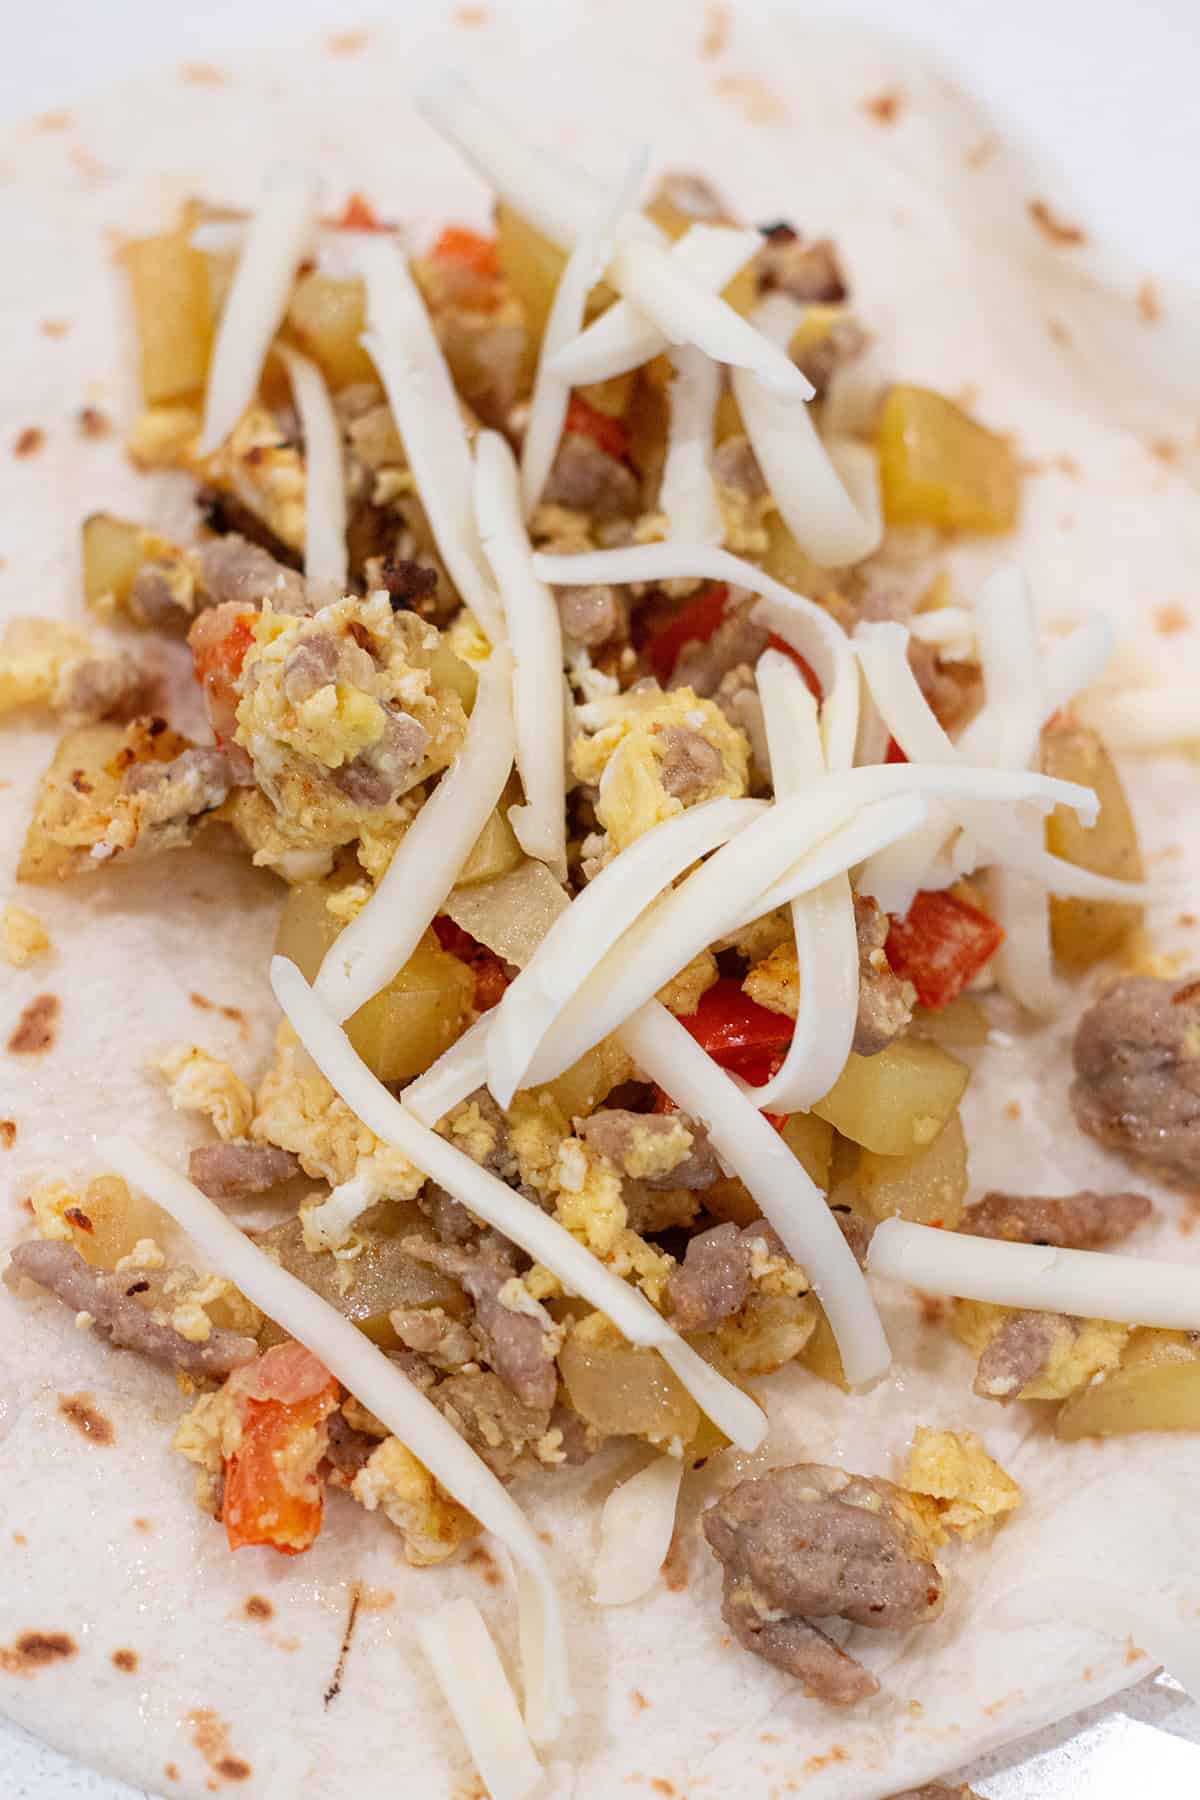 Tortilla shell with breakfast sausage, potatoes, peppers, eggs and cheese.